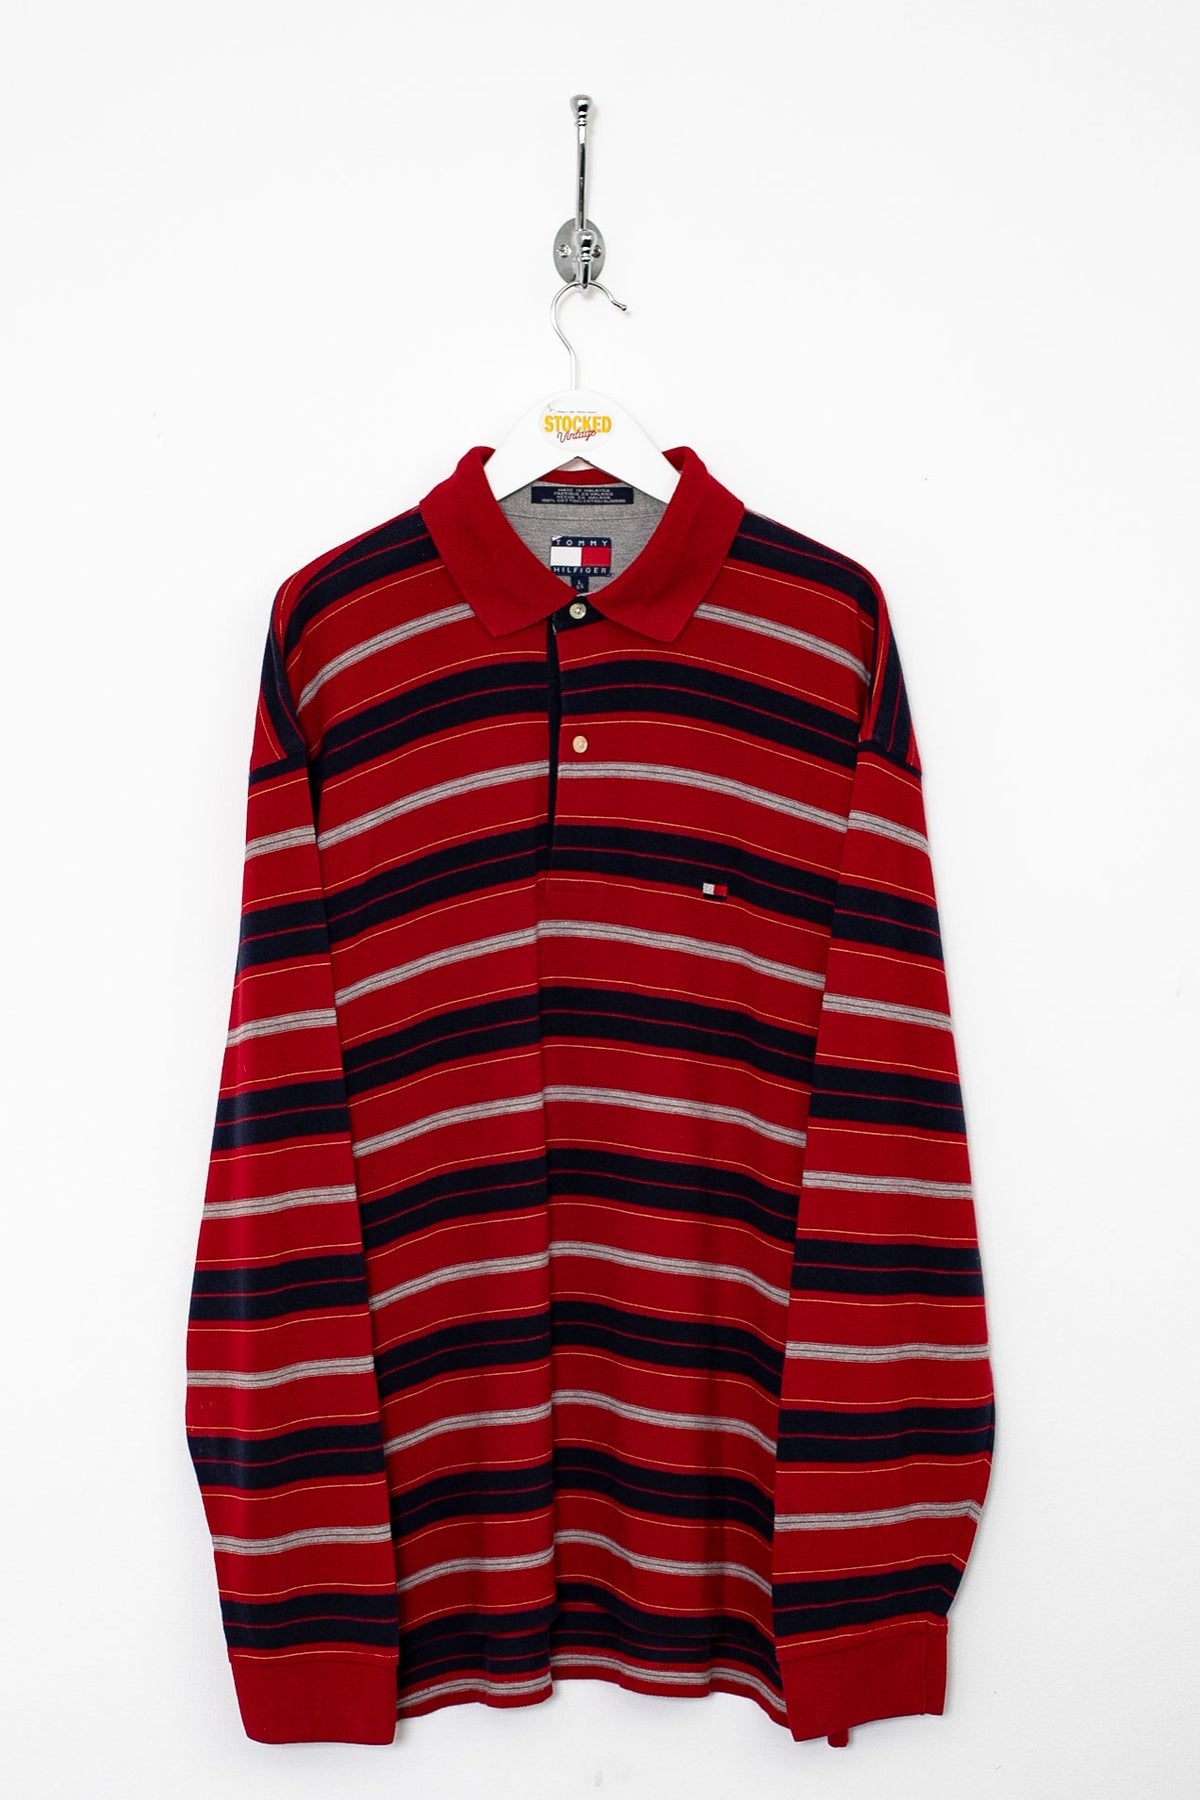 90s Tommy Hilfiger Long Sleeve Polo Shirt (L)